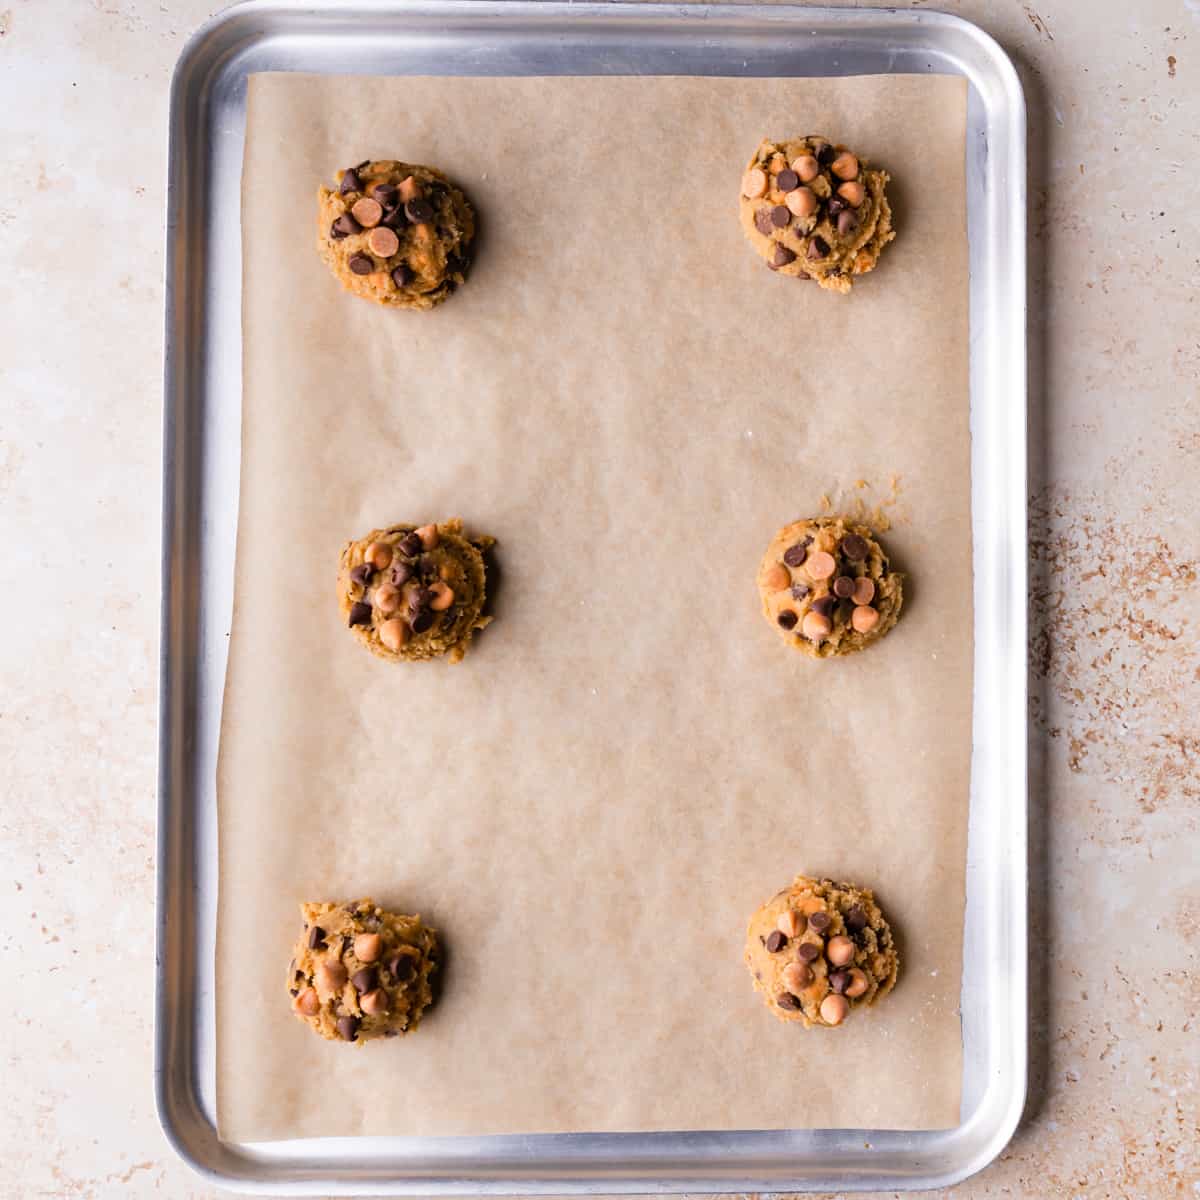 large metal baking sheet lined with brown paper and 6 portions of butterscotch cookies dough on it.